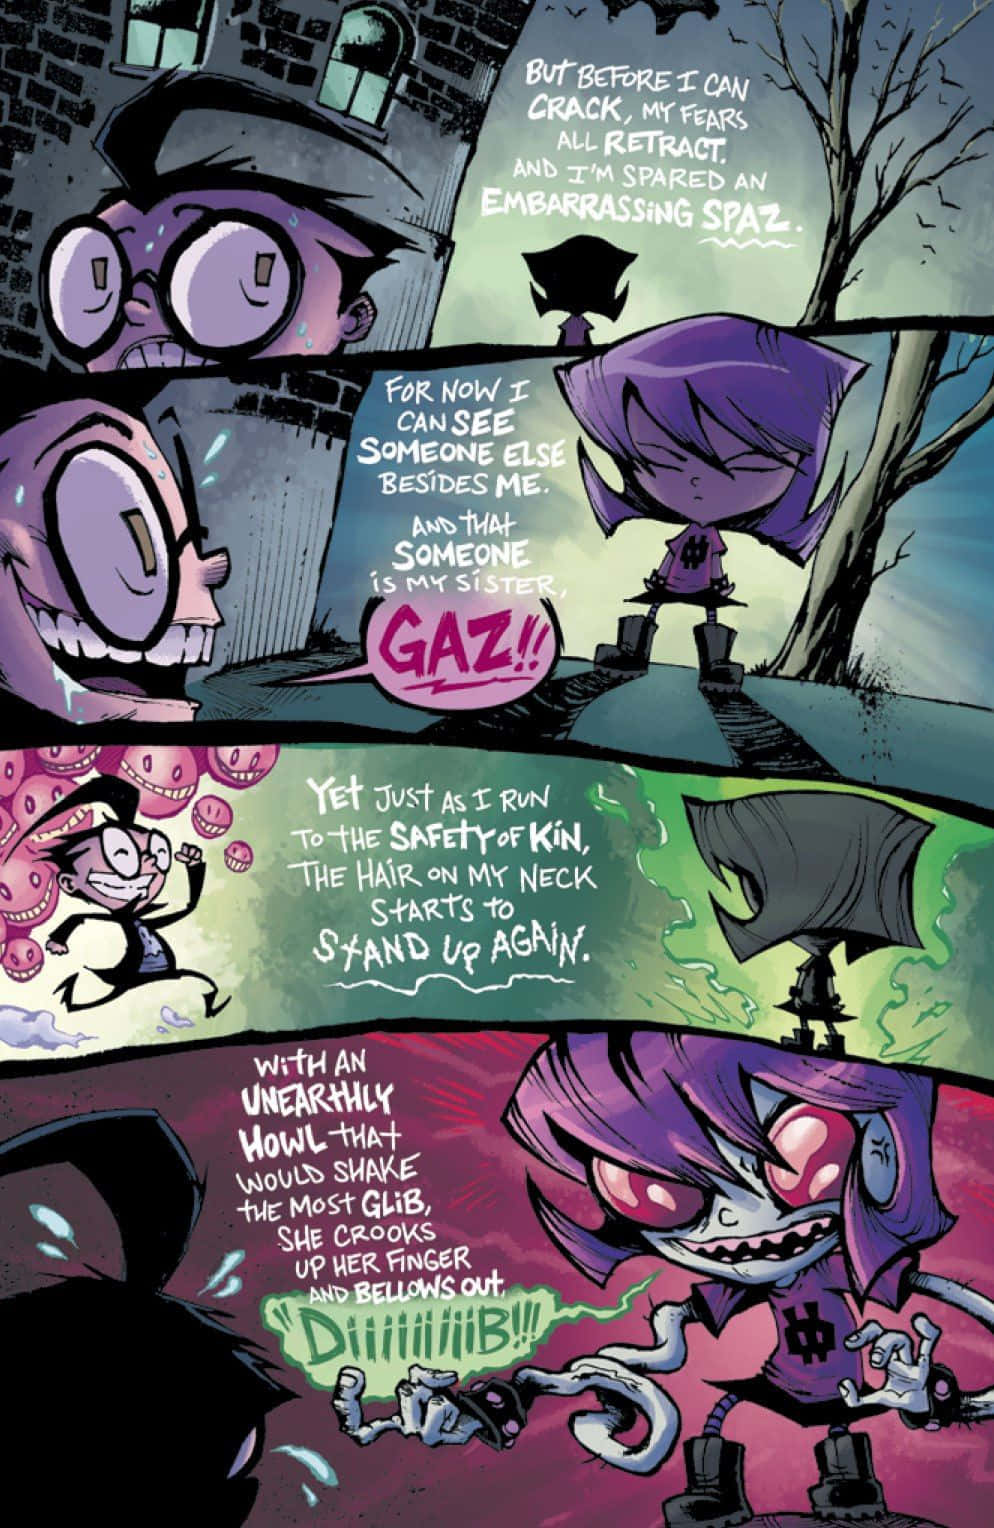 An iconic scene featuring Invader Zim, GIR, and Dib in an otherworldly setting.